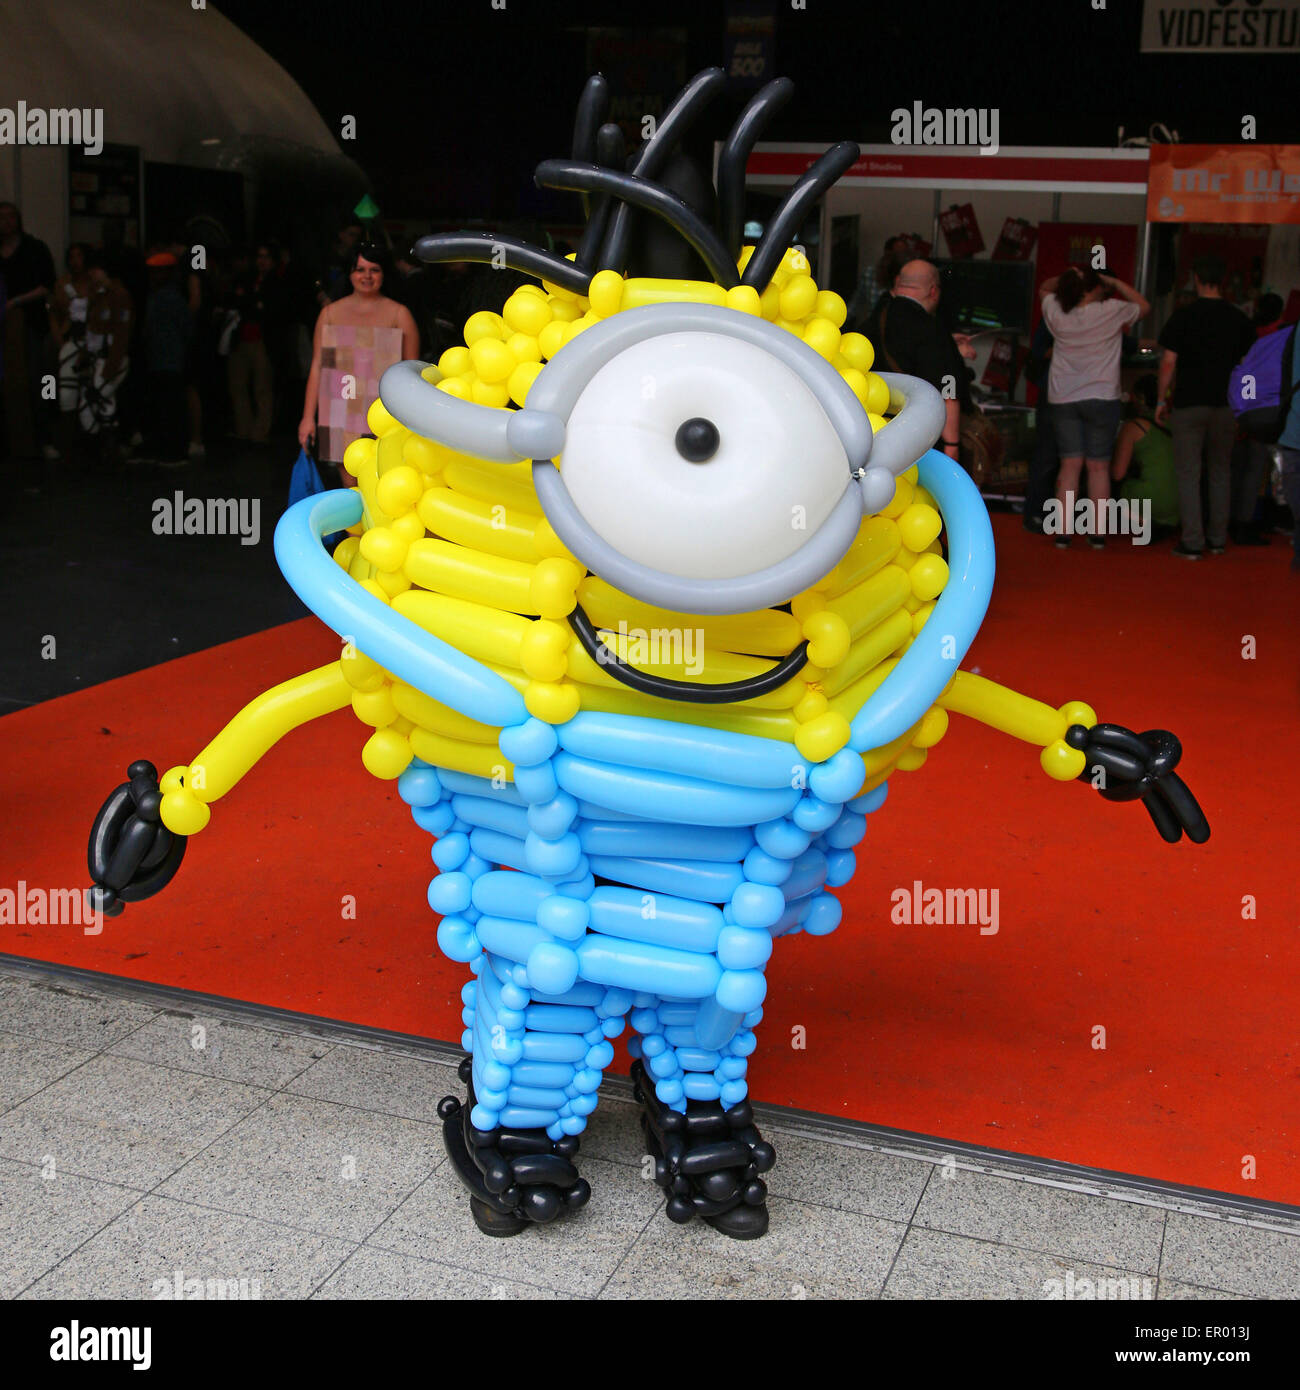 Adulto Inflable Dos ojos Minions Disfraz Halloween Cosplay Carnaval 